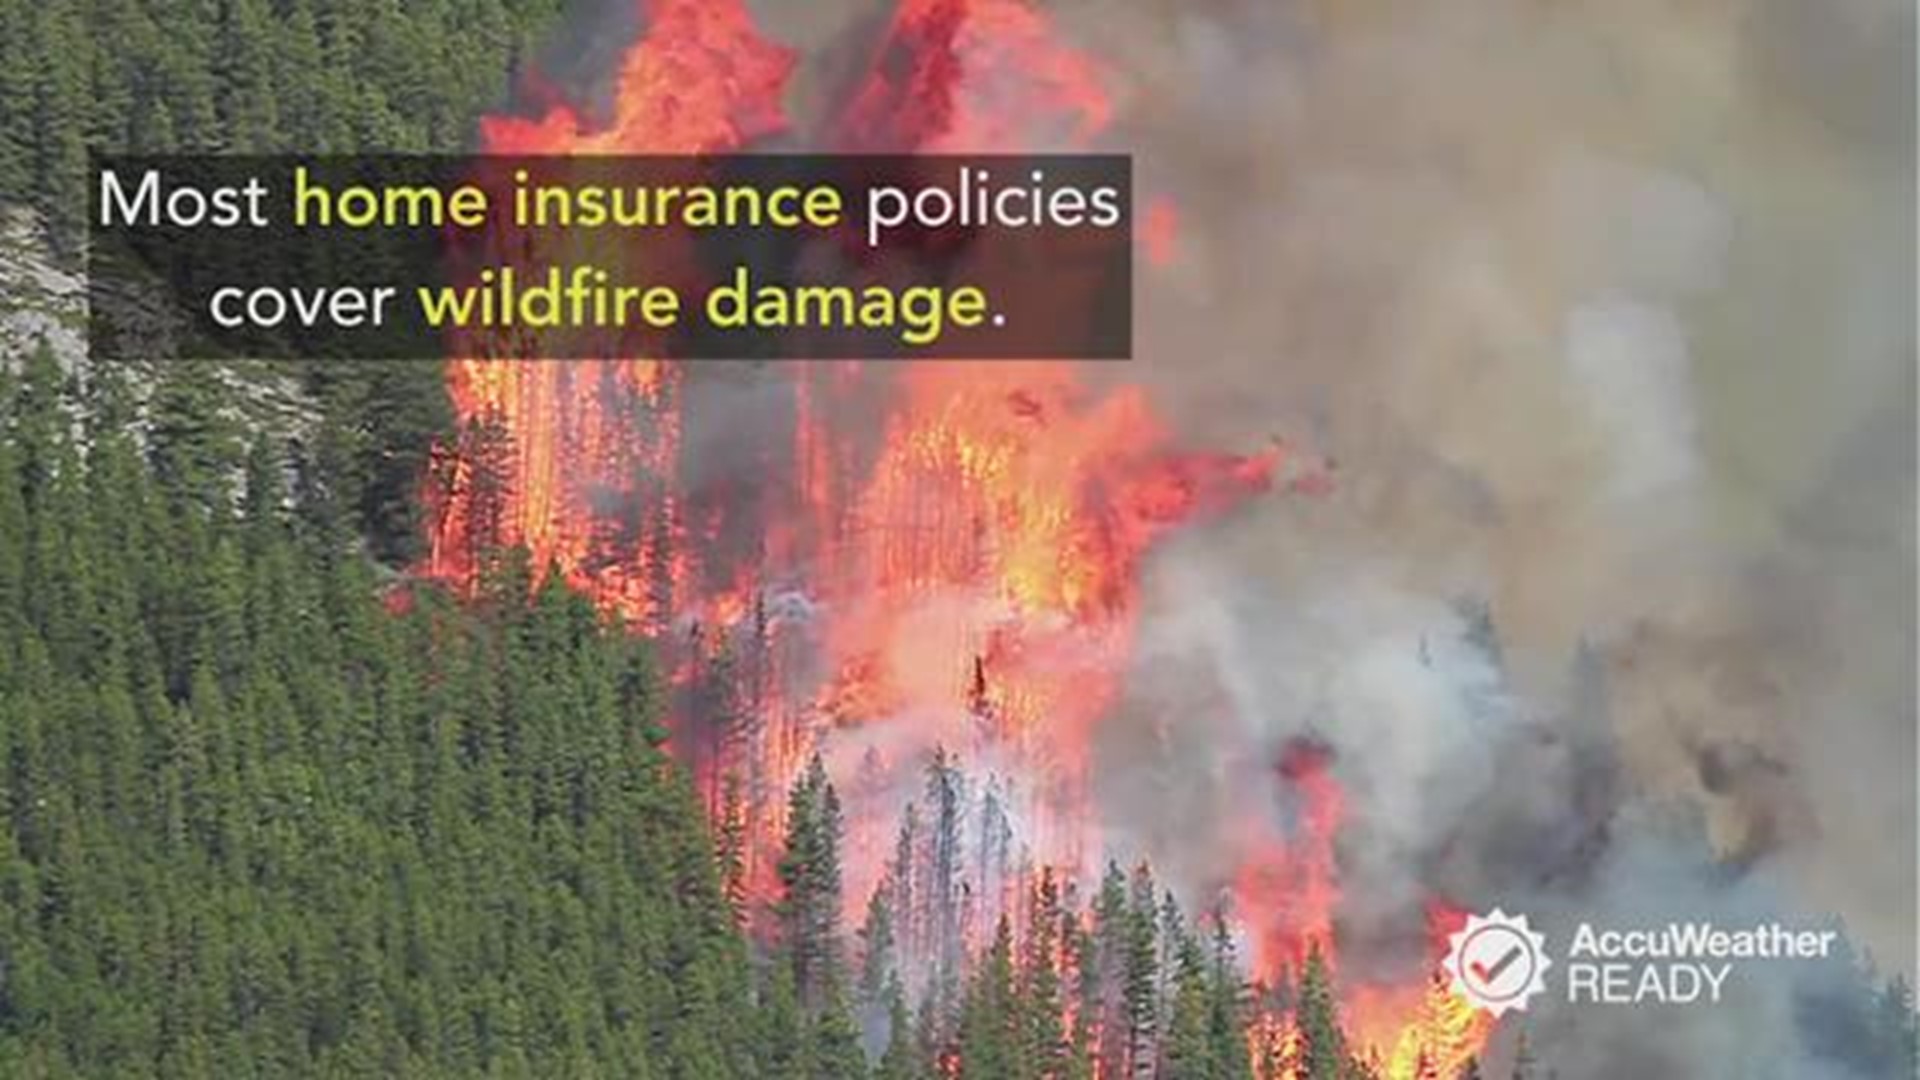 Here's what you need to know about what's covered if your home gets damaged by a devastating wildfire.